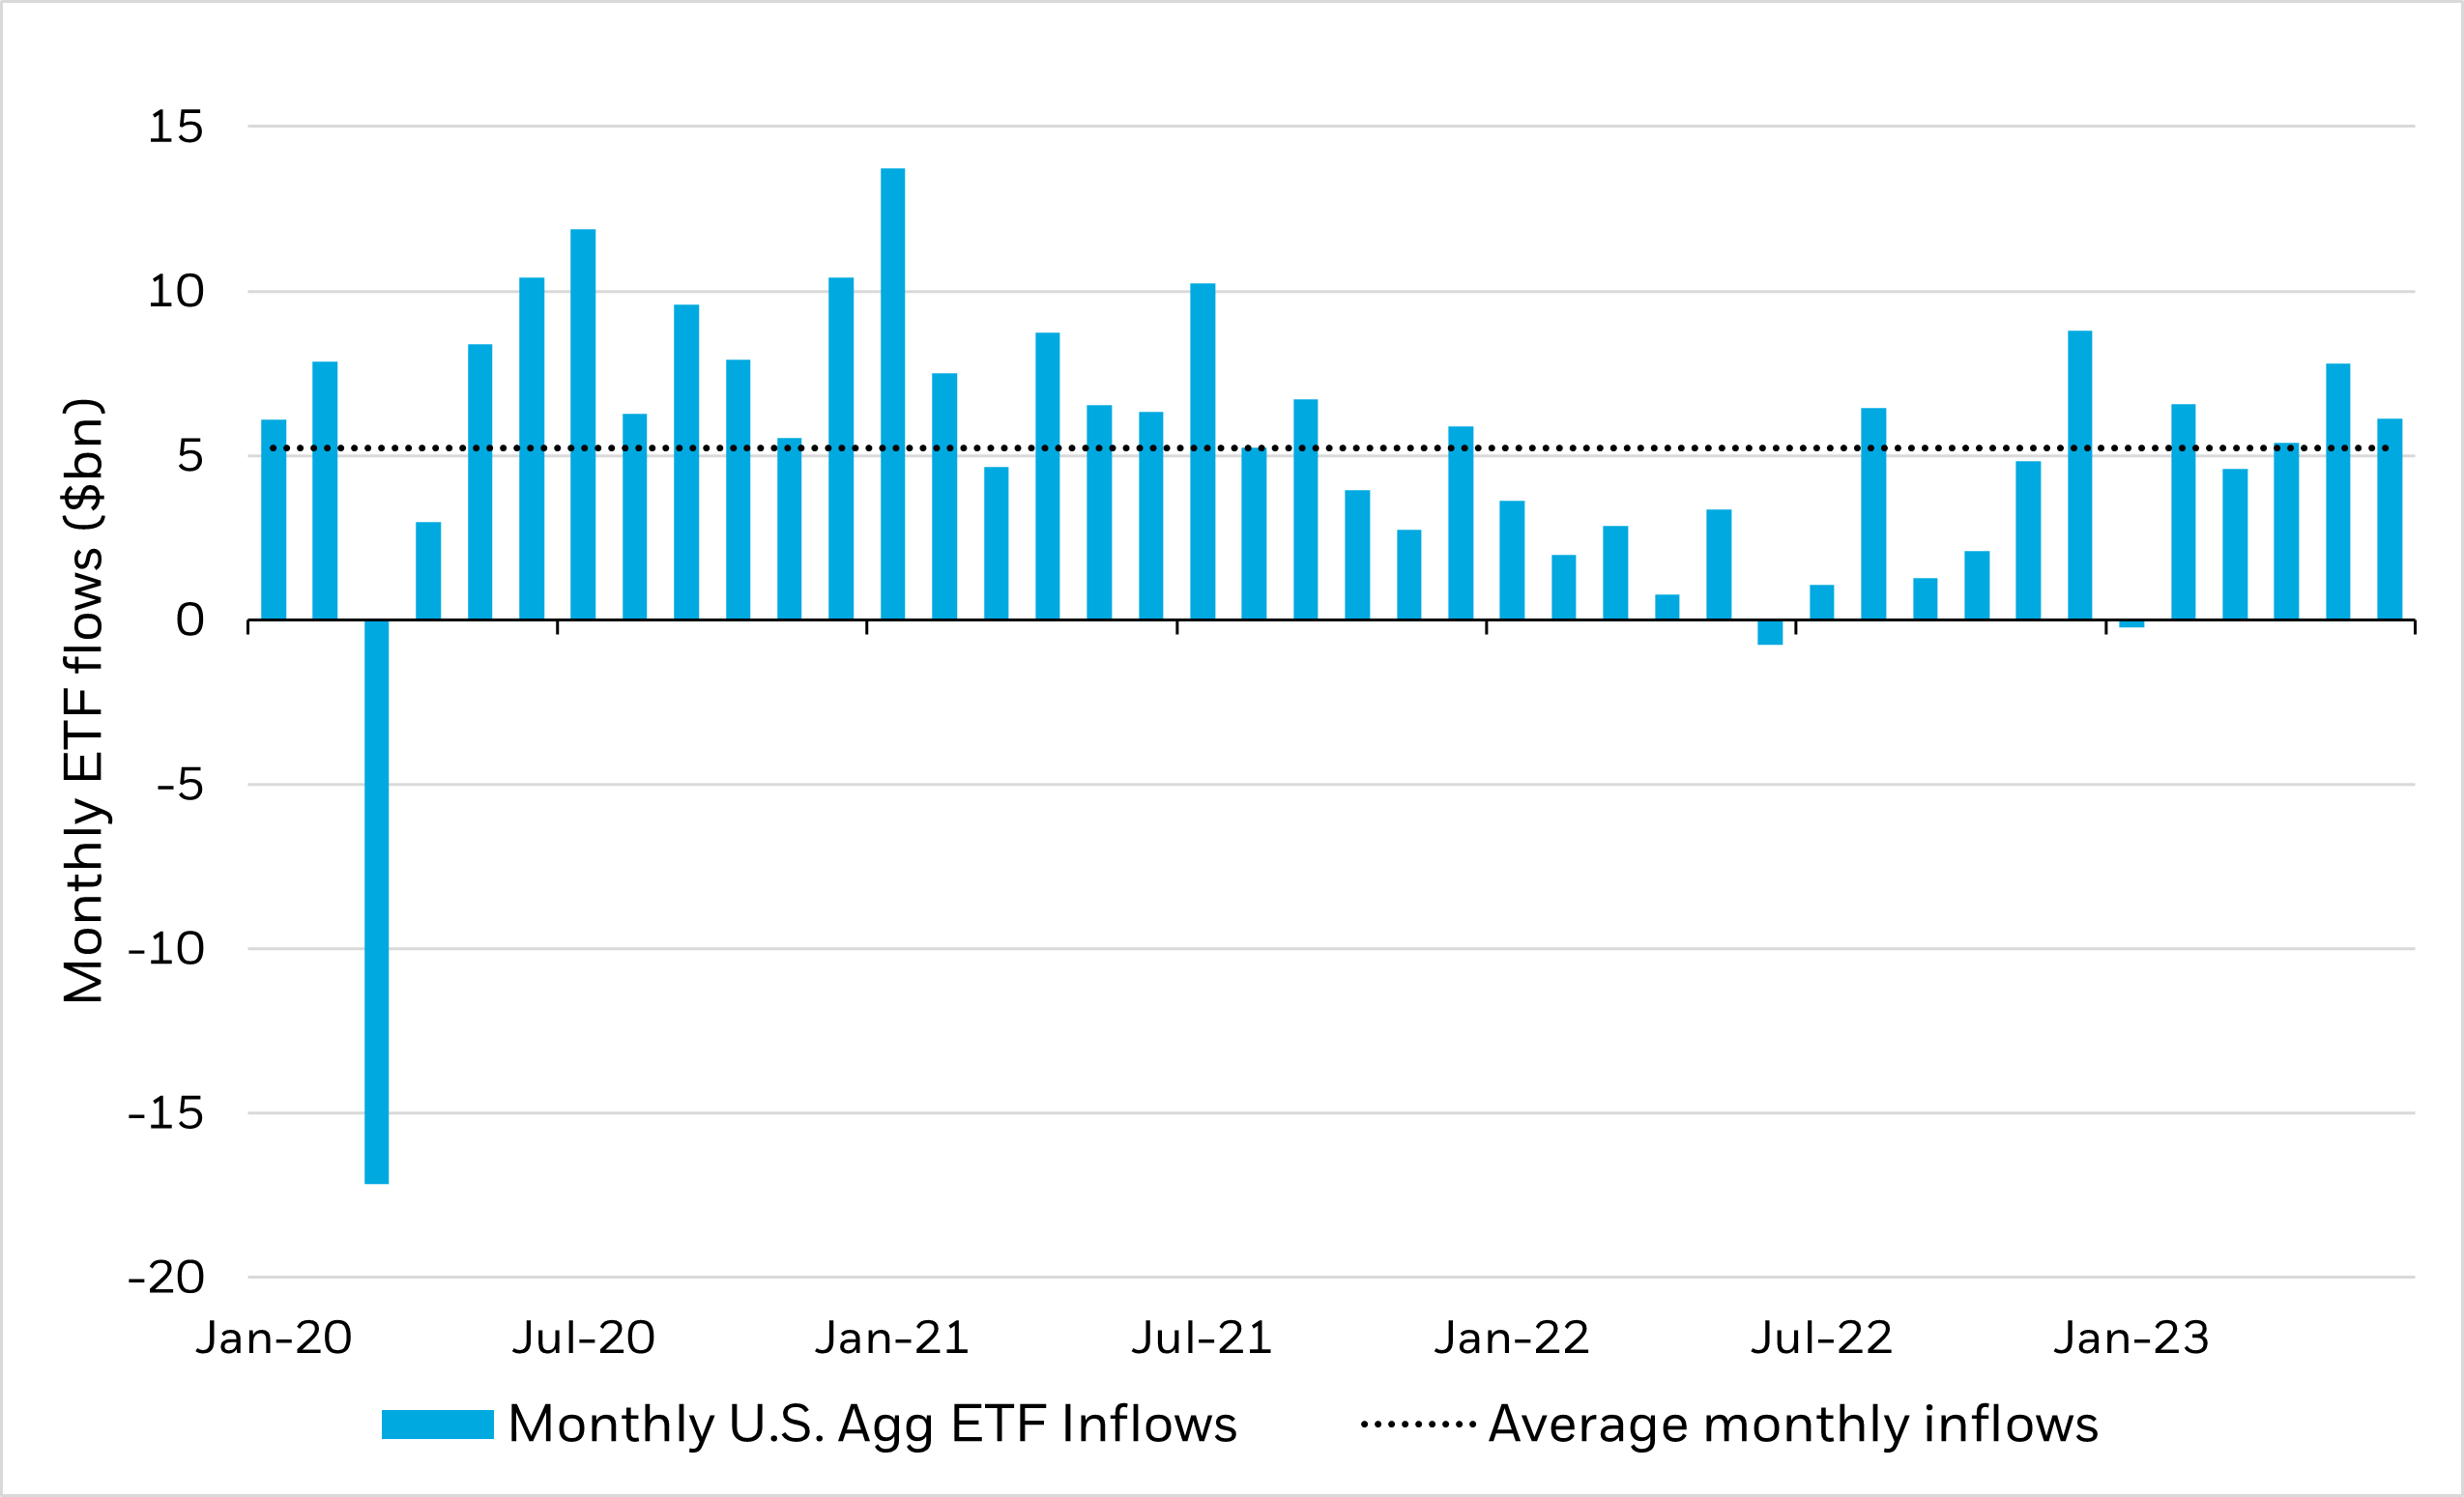 Bar chart showing monthly inflows to U.S. Agg ETFs since January 2020, overlayed with average monthly inflows as a dotted line.